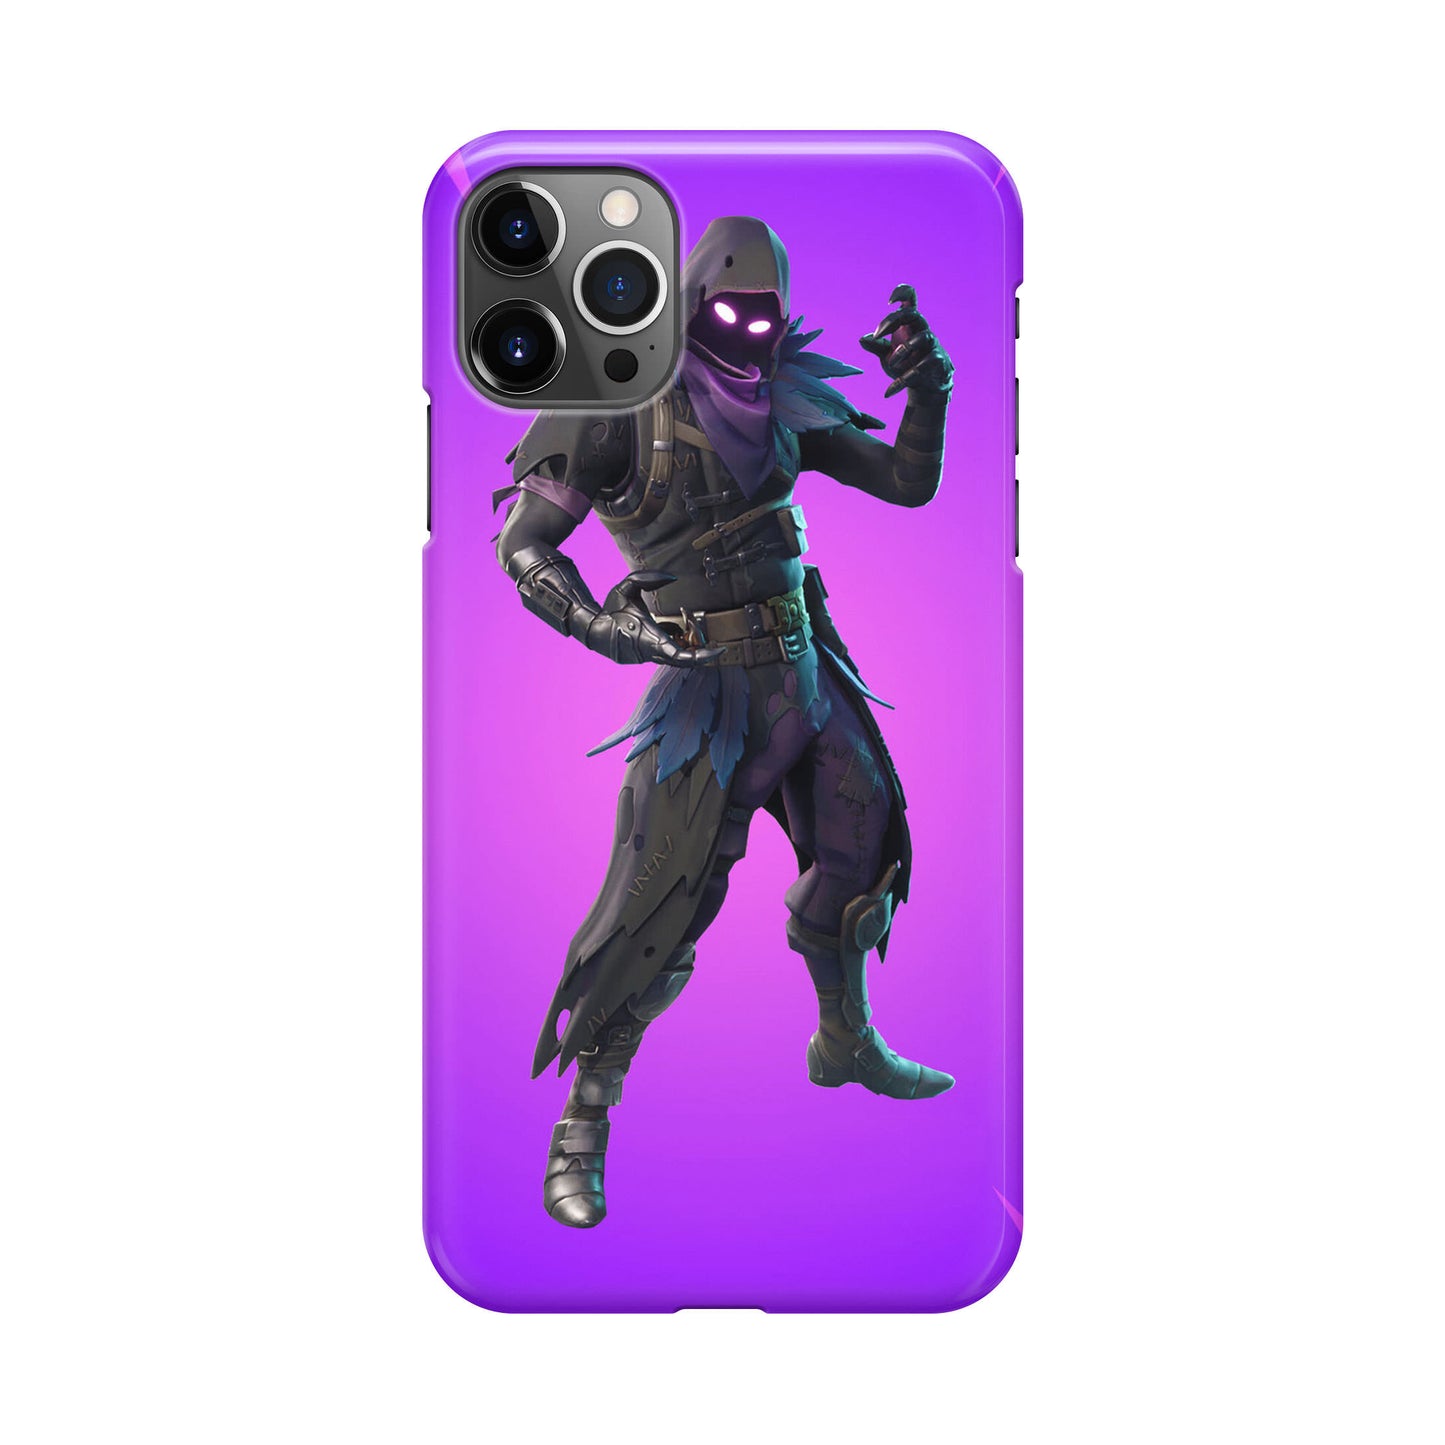 Raven The Legendary Outfit iPhone 12 Pro Max Case